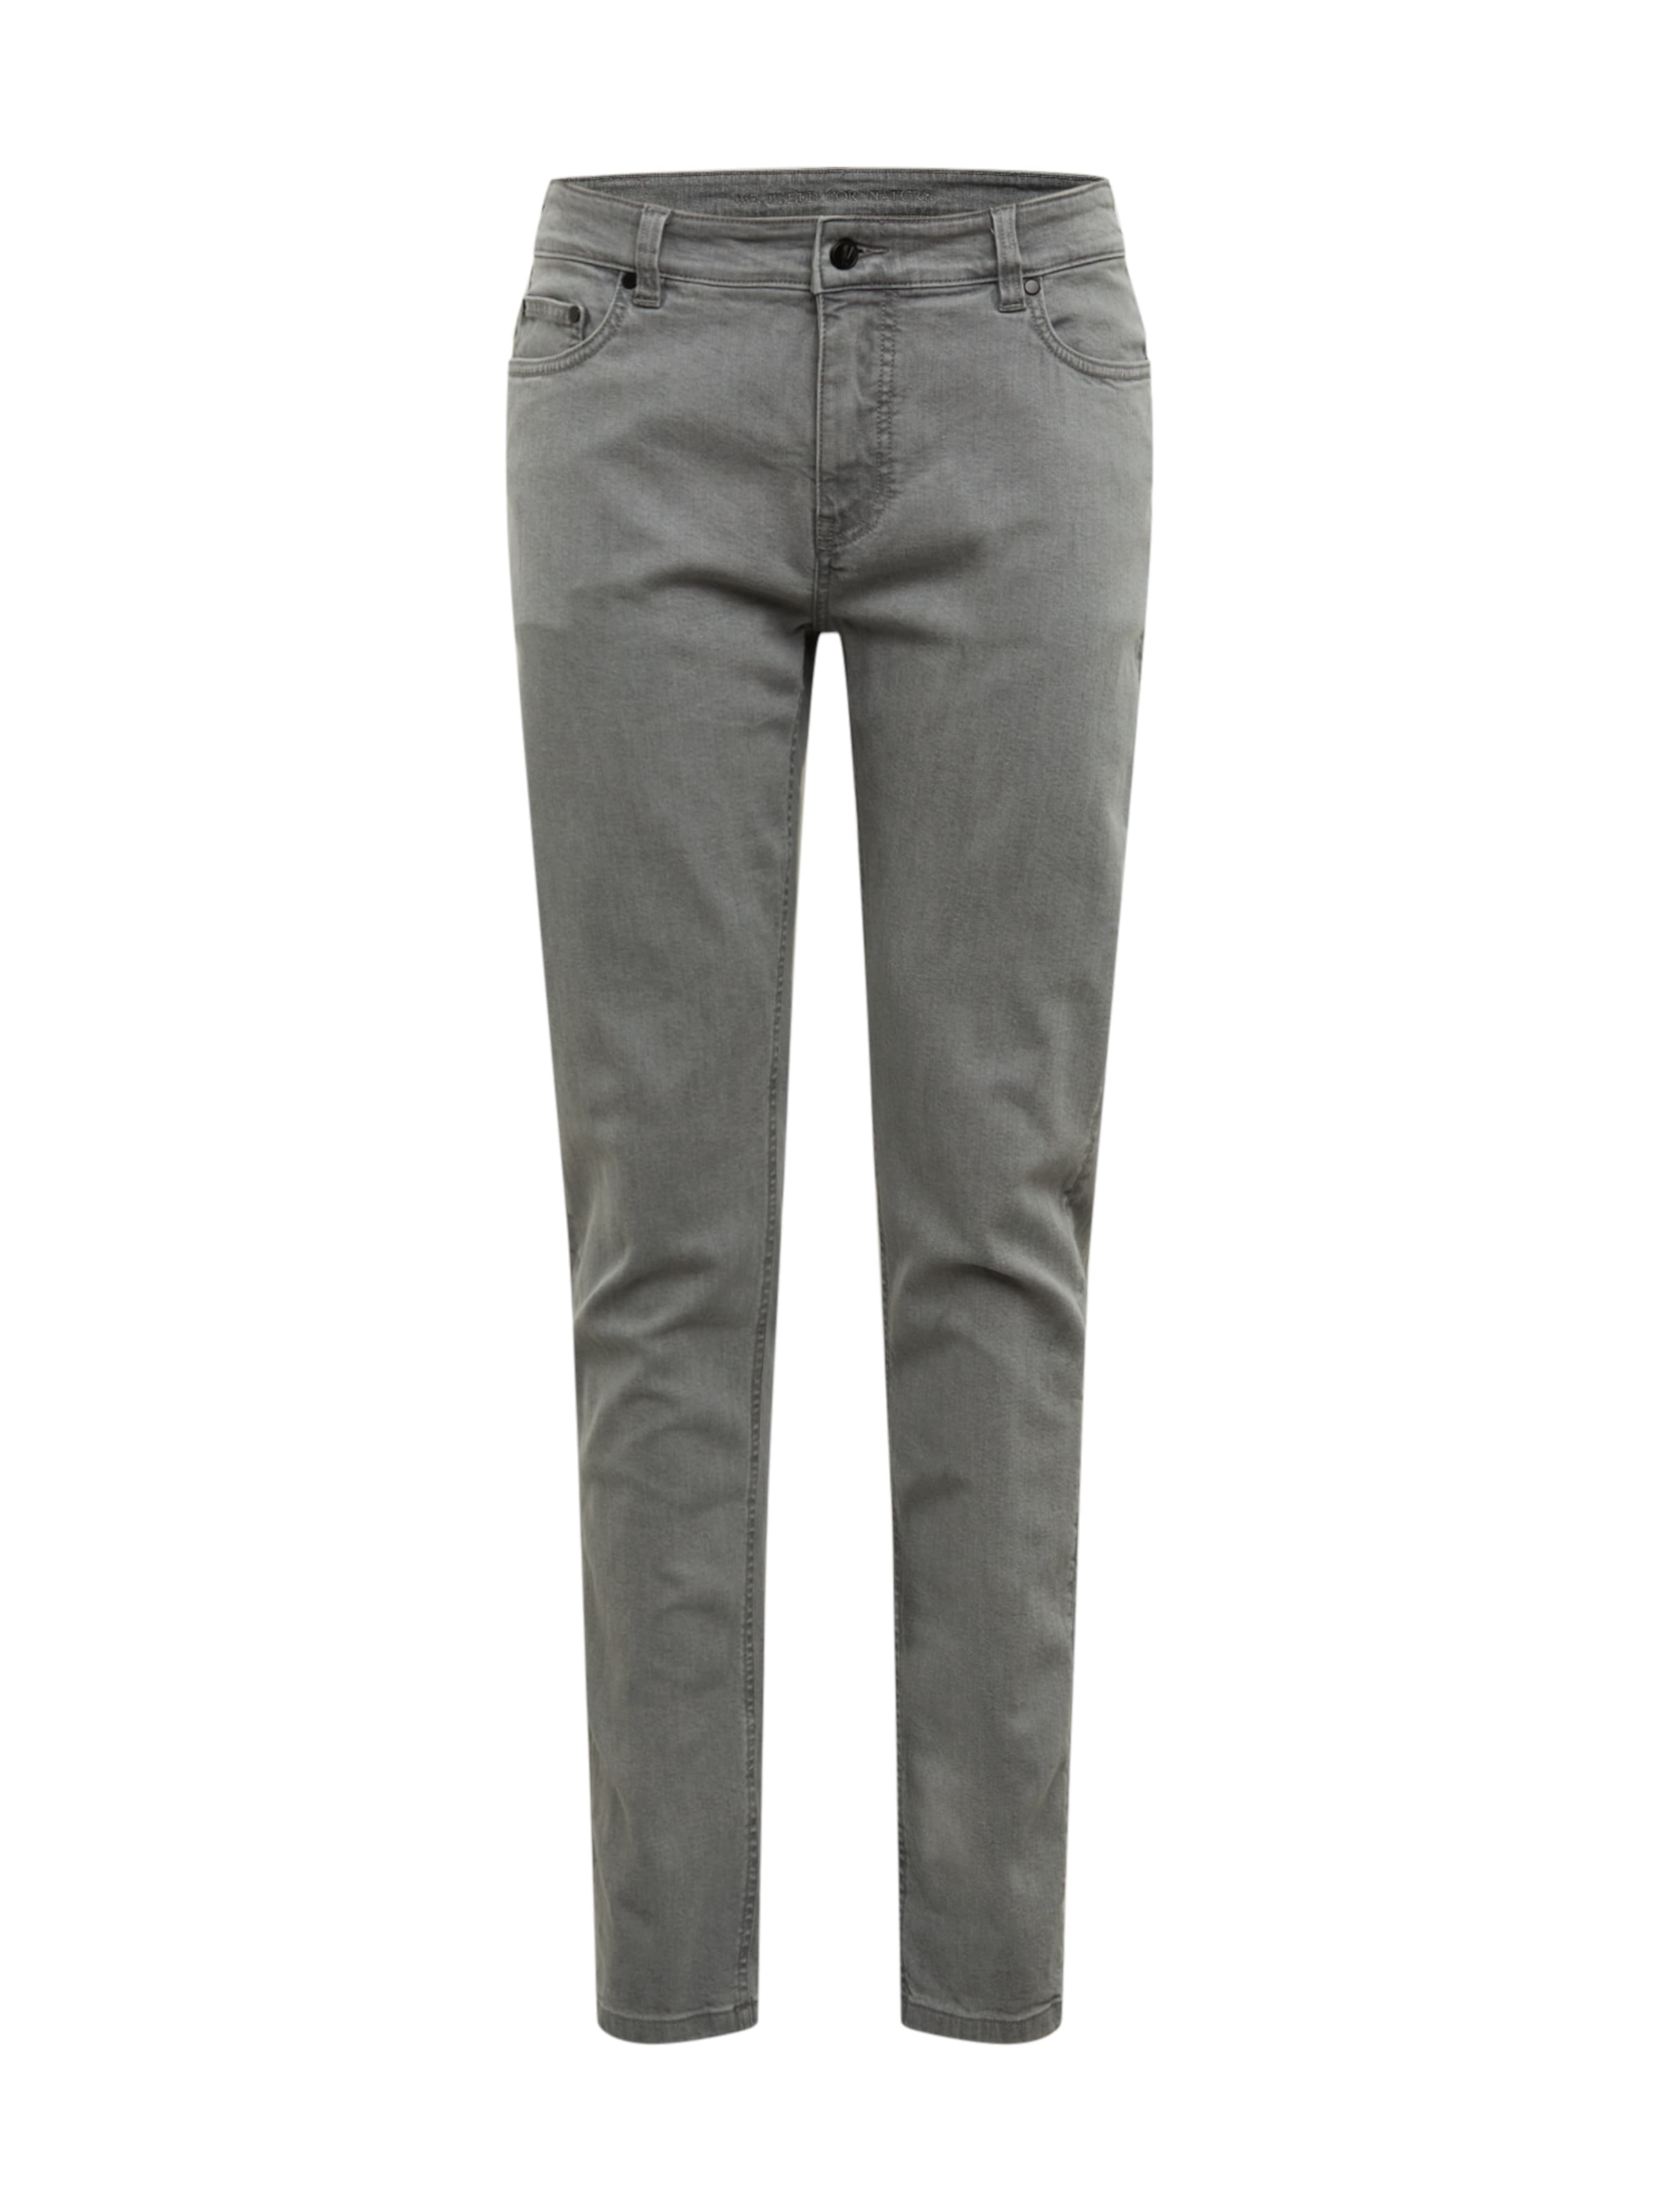 Jeans pNdNu bleed clothing Jeans Active 2.0 in Grigio 